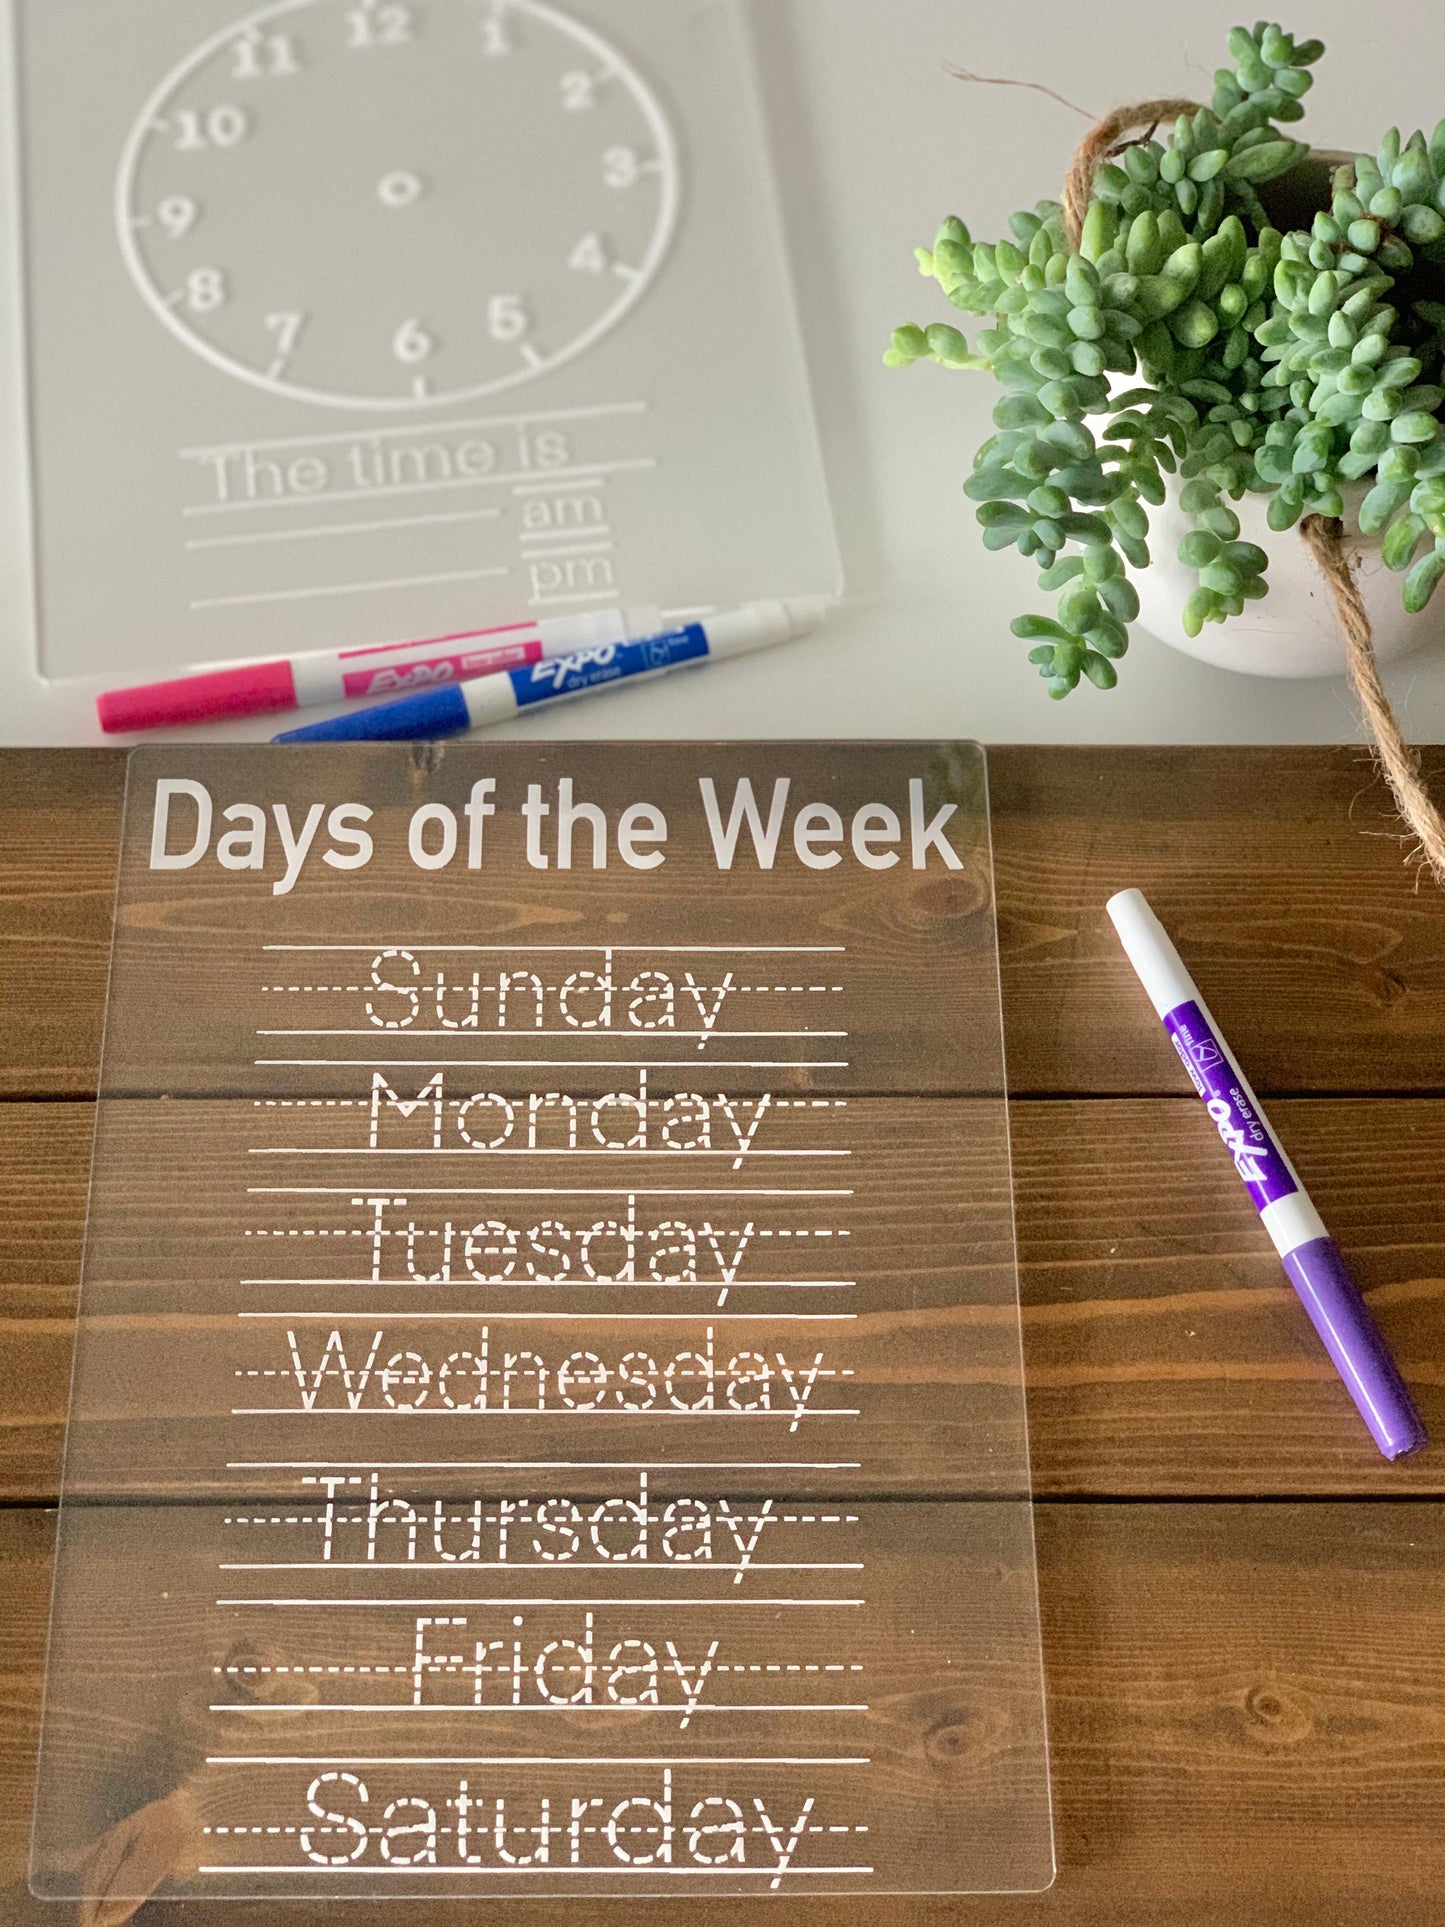 Days of the Week Acrylic Dry Erase Board